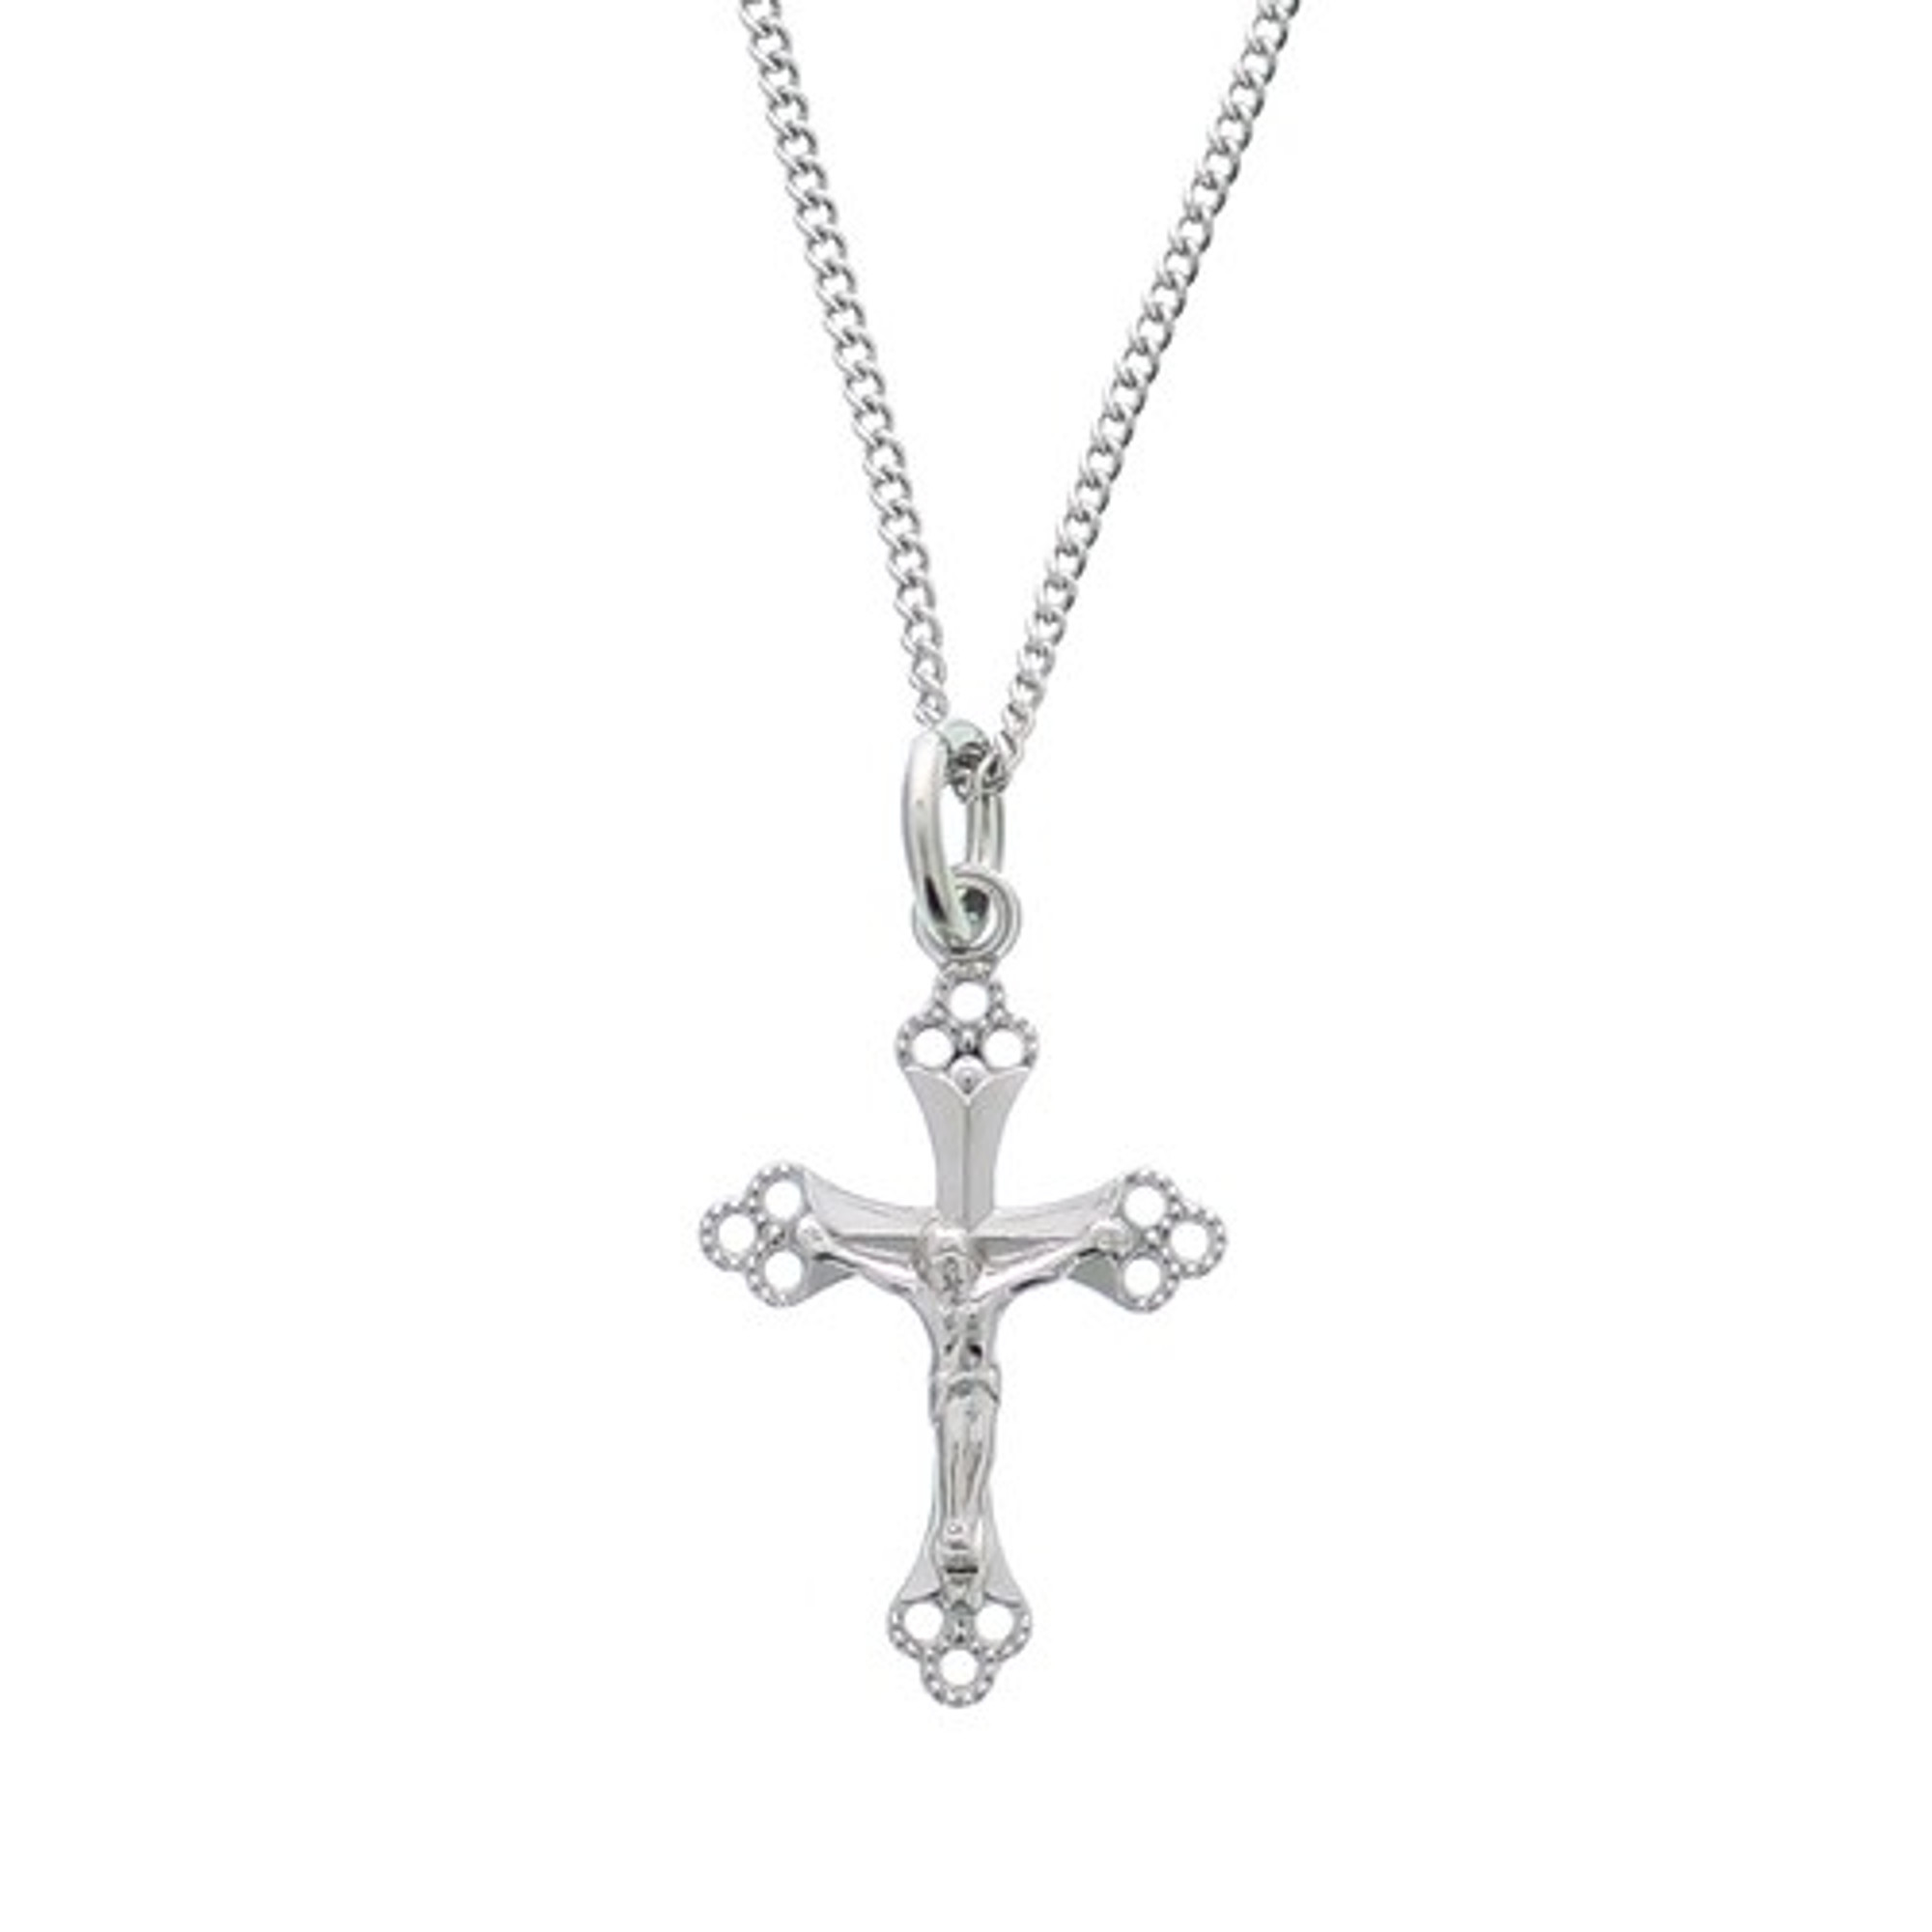 Sterling Silver Crucifix Necklace | The Catholic Company®